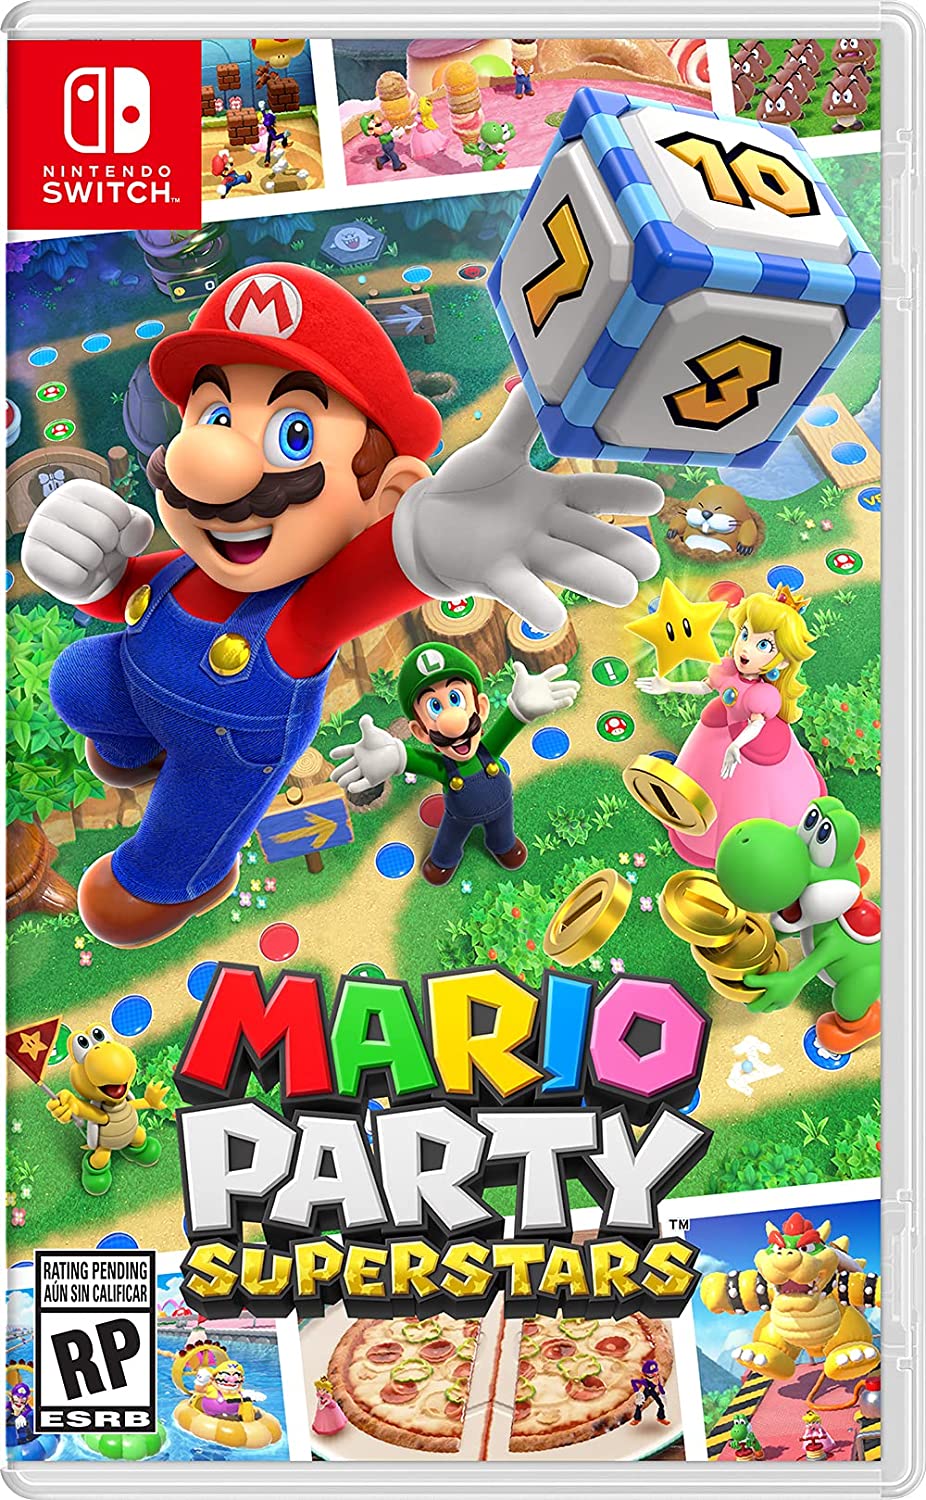 Nintendo Switch OLED Console White with Mario Party Superstars, Accessory Starter Kit and Screen Cleaning Cloth Bundle - Pro-Distributing